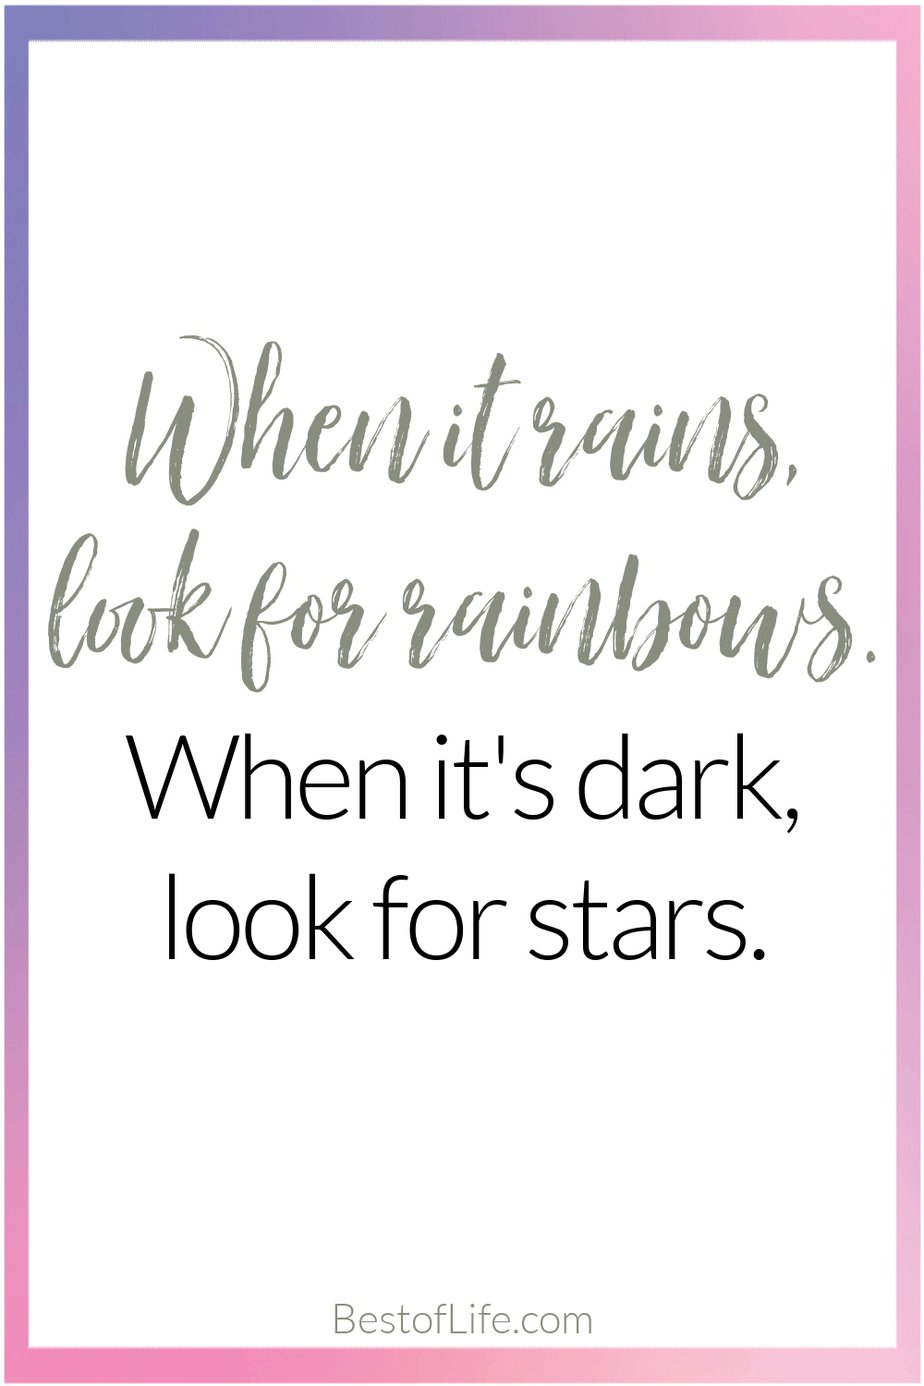 Quotes for Girls Rooms "When it rains look for rainbows. When it's dark look for stars."